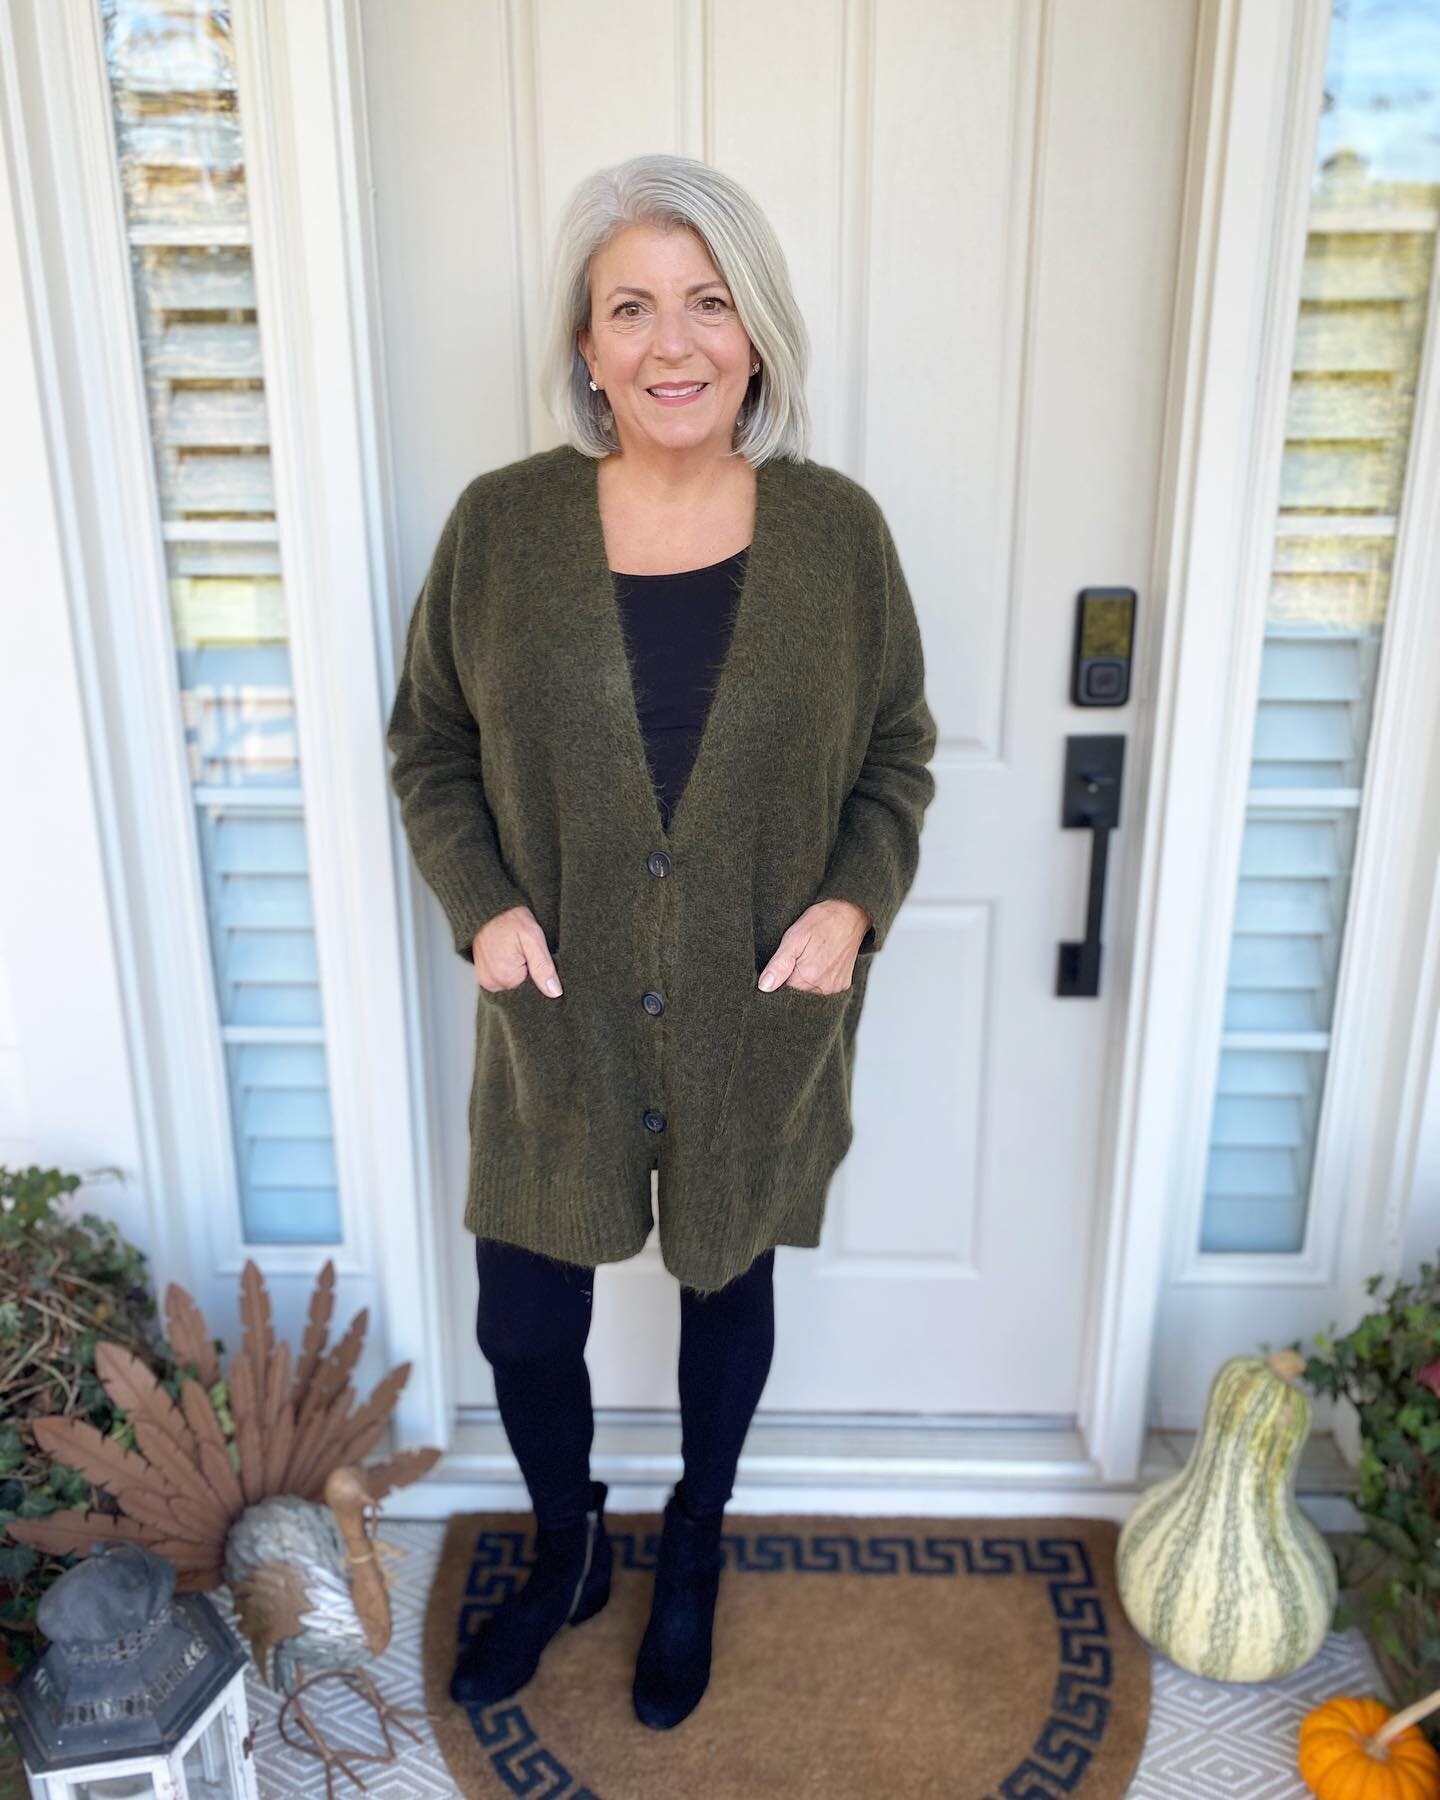 It's decided! 🤔  This is my comfy Thanksgiving look! 🦃 Head to toe, I will be comfy, casual... and chic!  #myeileen #partner

What is your family's favorite Thanksgiving food that you cook?  Mine is my homemade dressing! 
I will be sharing my recip